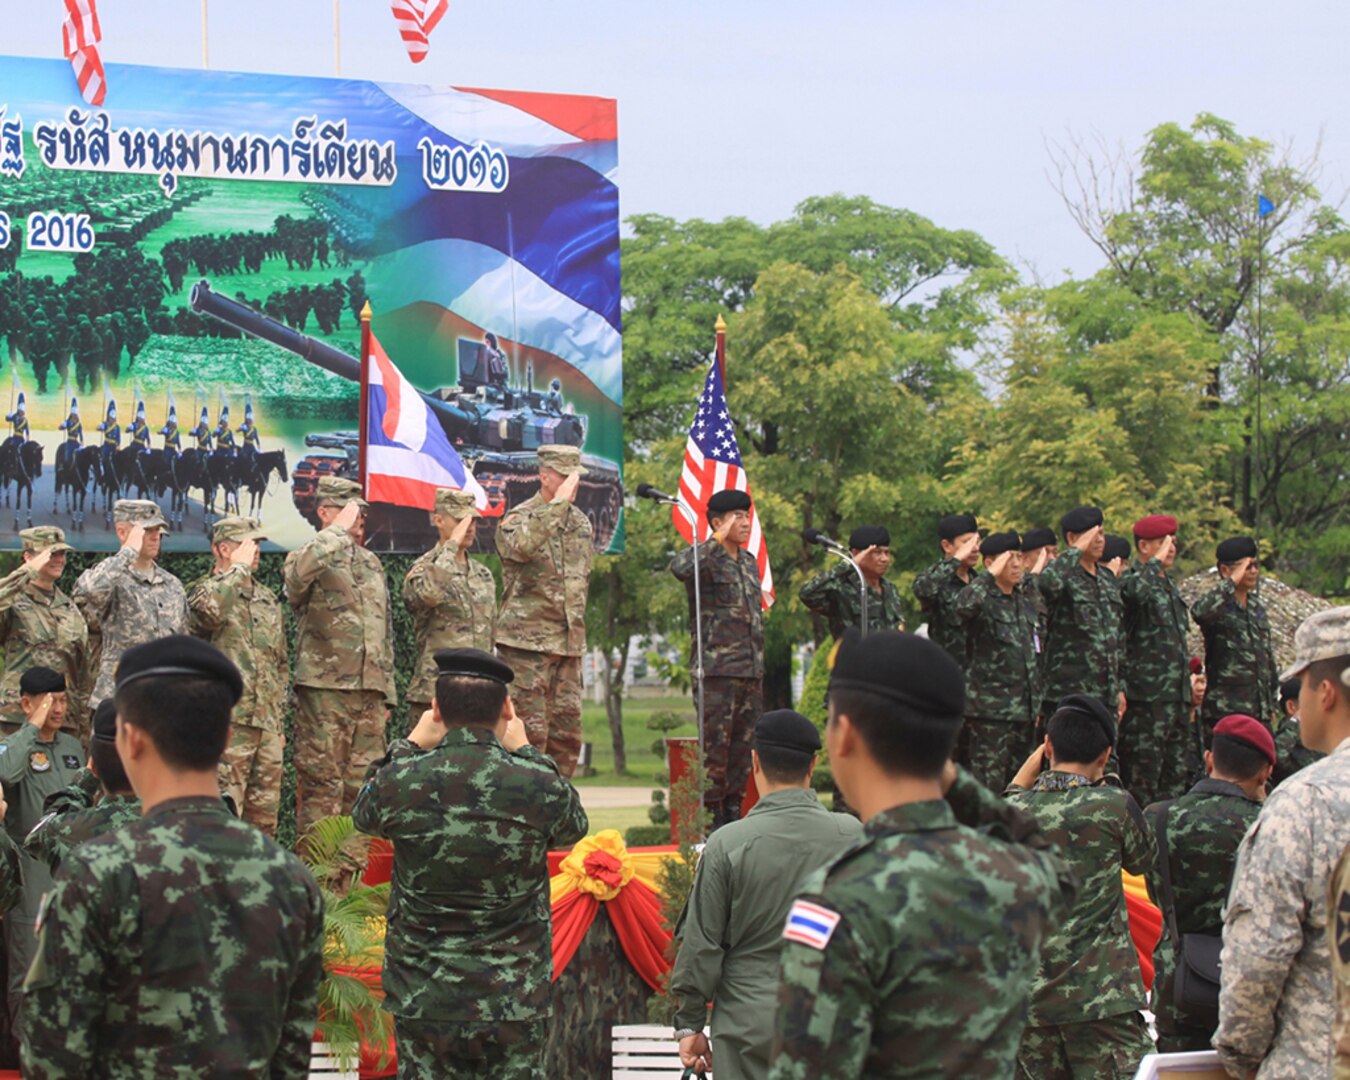 FORT ADISORN, Thailand  (June 27, 2016) - Brig. Gen. Brian Alvin, Deputy Commanding Gereral, U.S. Army Reserve and Lt. Gen. Thakonkiat Nuanyong, Director General of the Royal Thai Army Training Command address a U.S.-Thai formation at Fort Adisorn prior to beginning Hanuman Guardian, part of Pacific Pathways. Hanuman Guardian is a joint U.S. - Thai exercise focused on military interoperability while providing disaster relief.